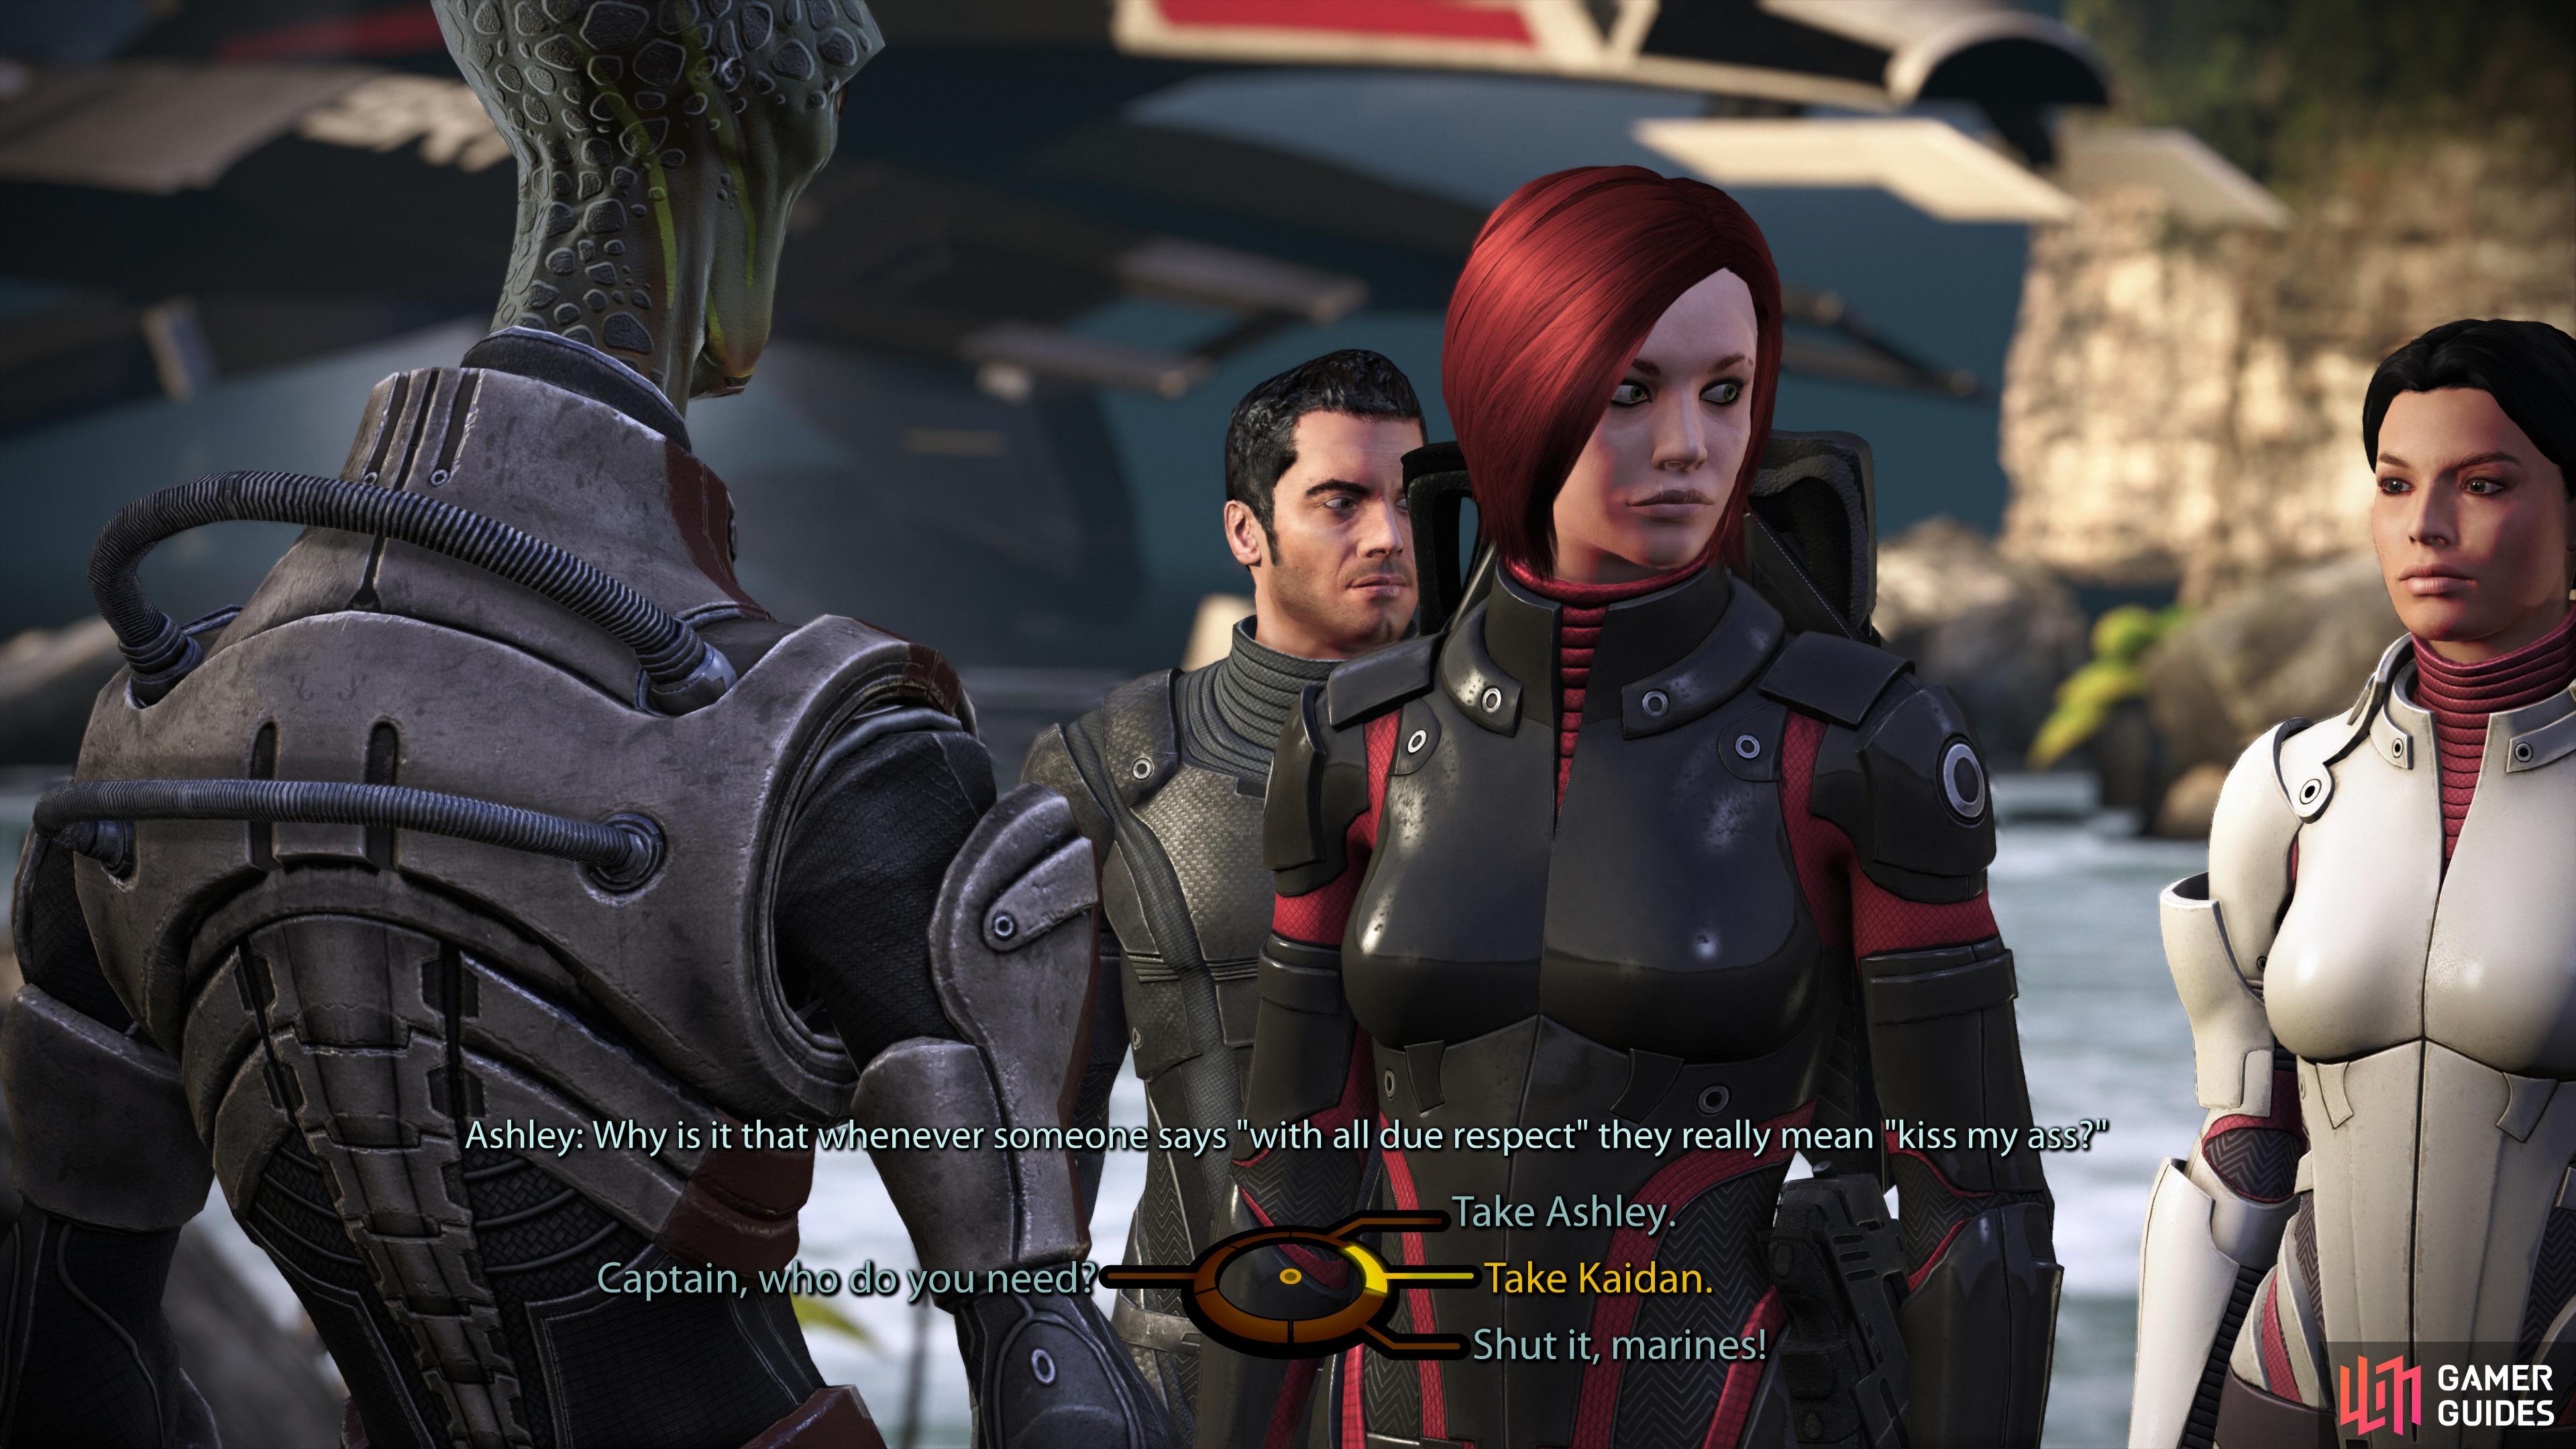 After dealing with Wrex, you’ll have to send either Ashley or Kaiden with Captain Kirrahe.